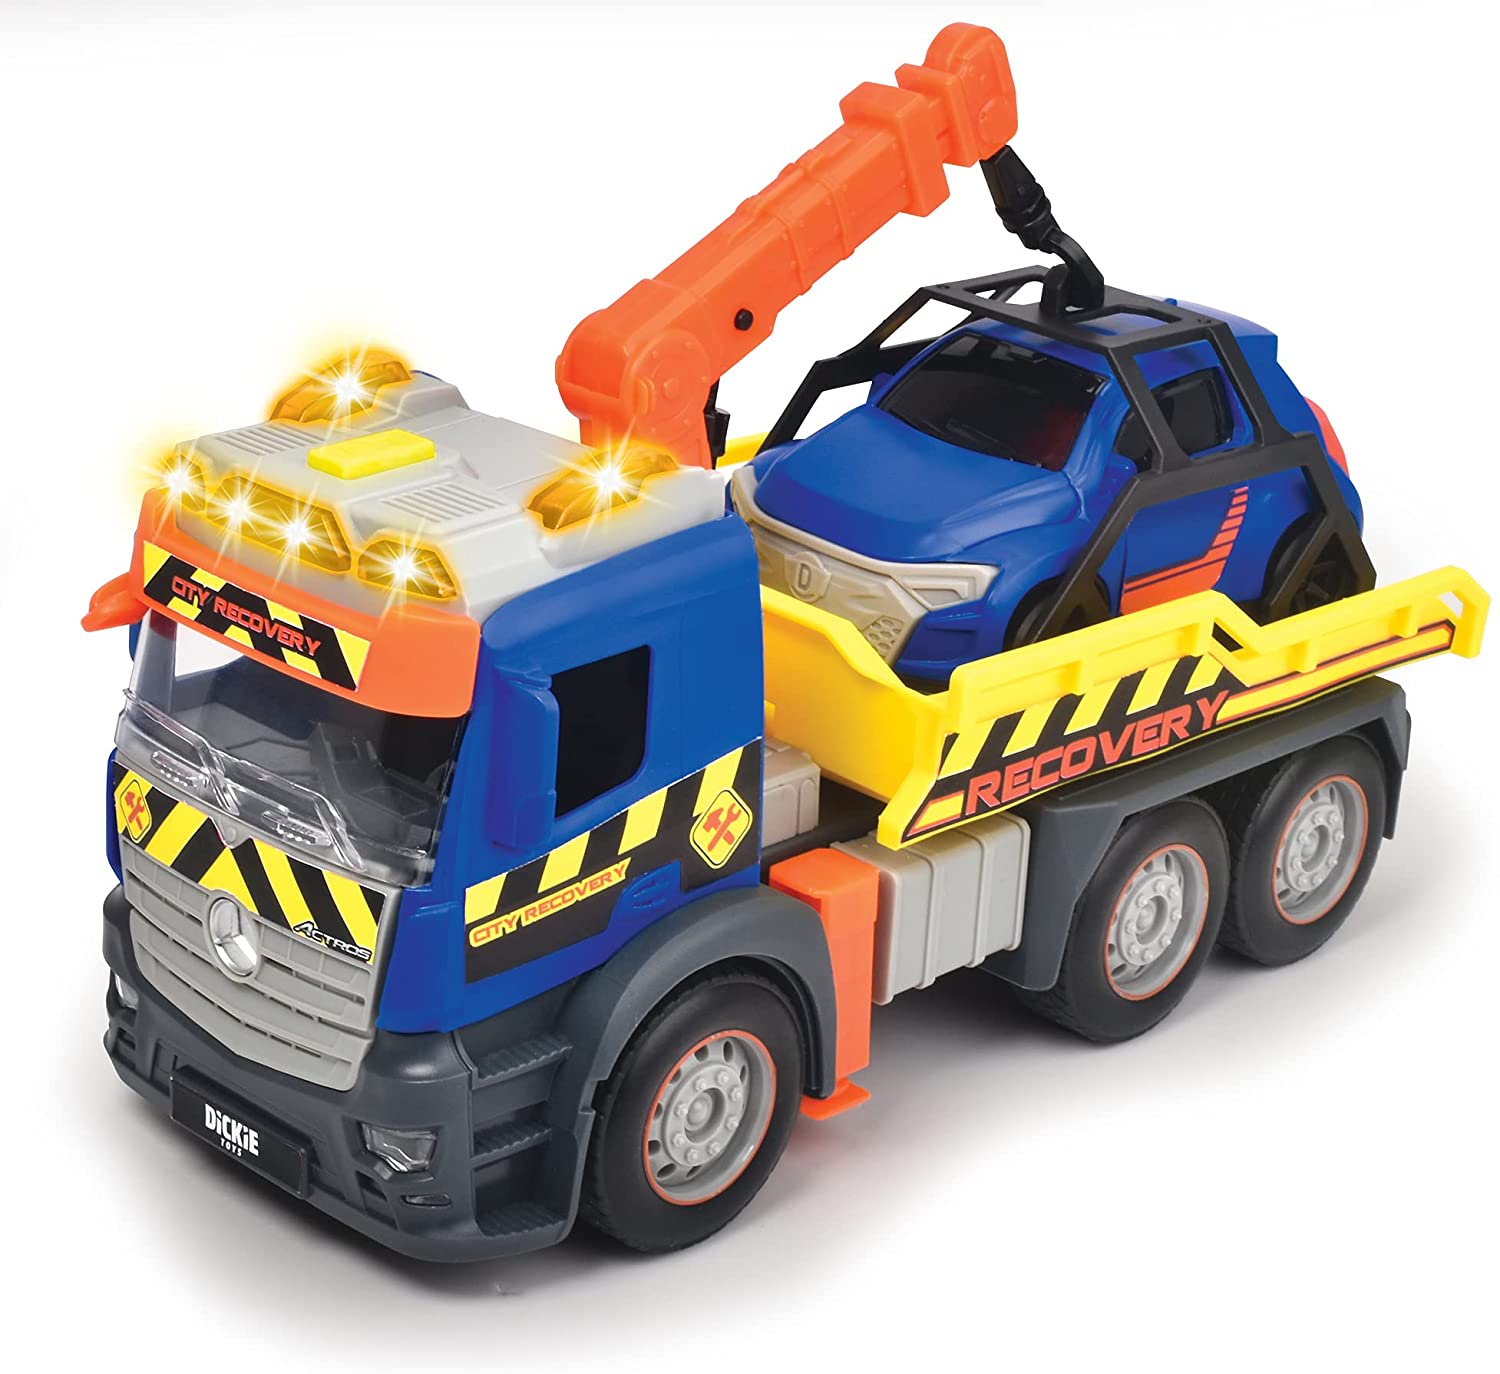 Camion - Recovery - Mercedes, 26 cm | Dickie Toys - 1